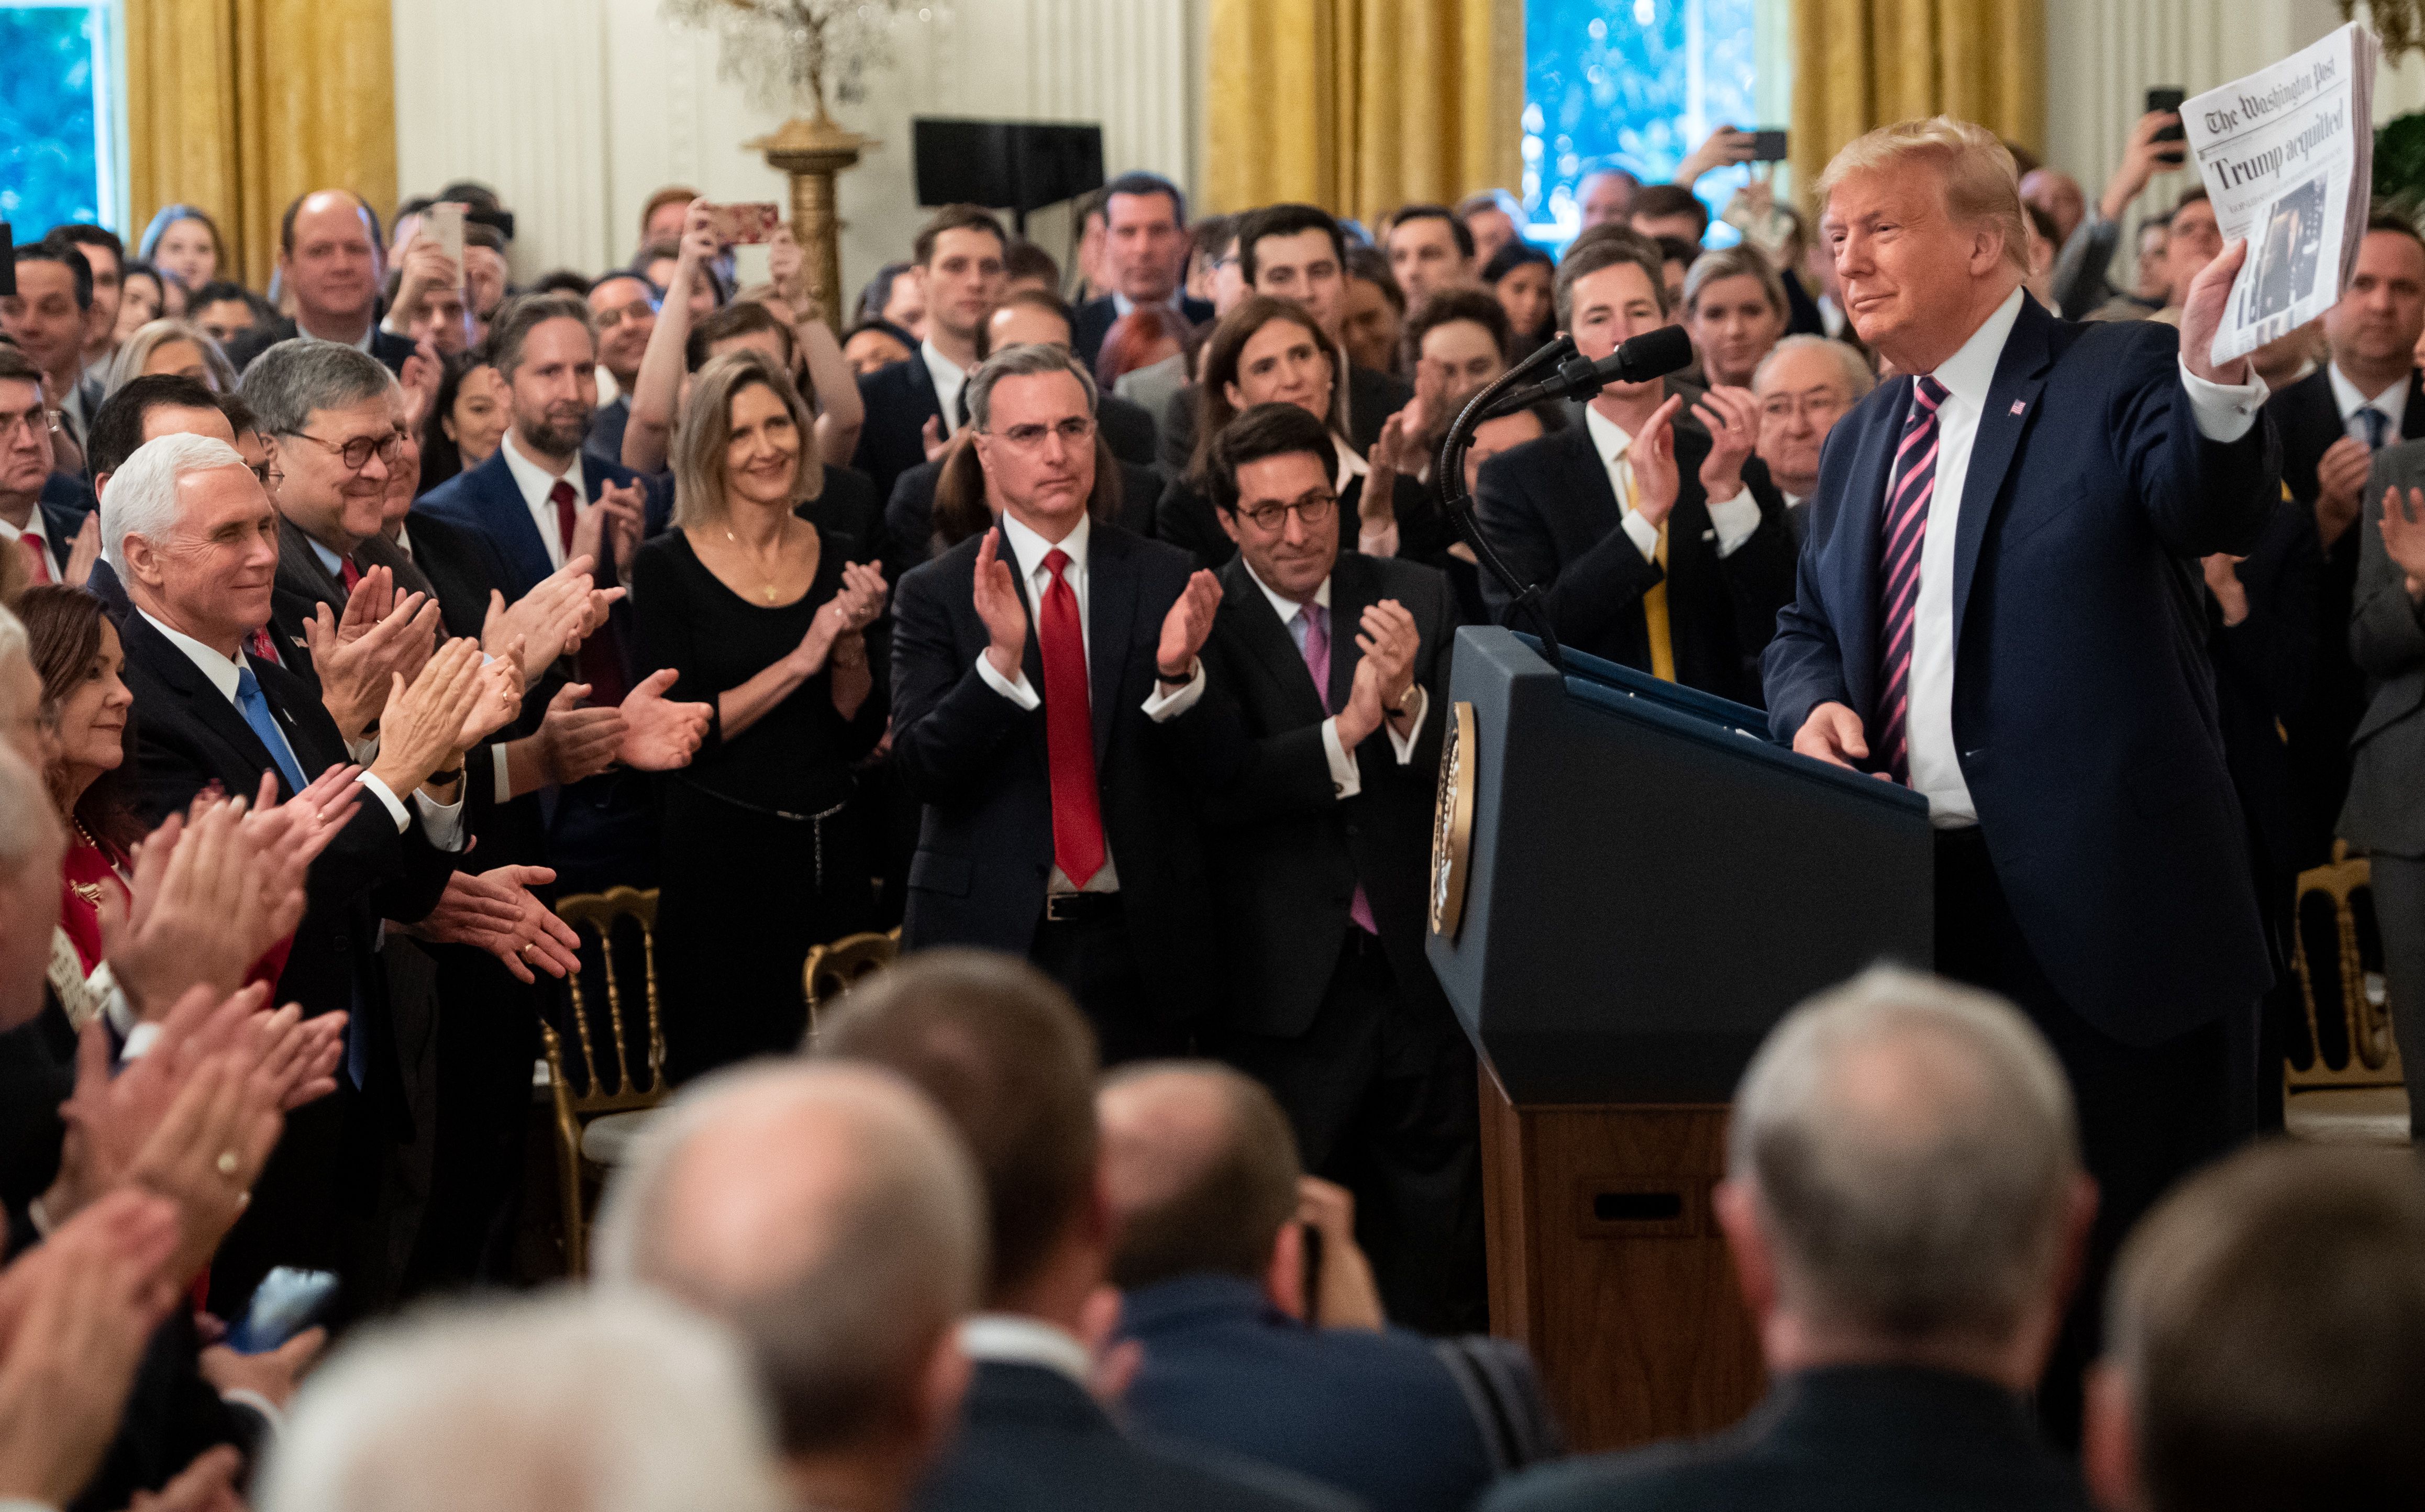 Trump holds up a Washington Post front page that says “Trump Acquitted” as notable Republicans including Vice President Mike Pence, AG Bill Barr, dozens of lawmakers, and members of his impeachment defense team applaud him. 